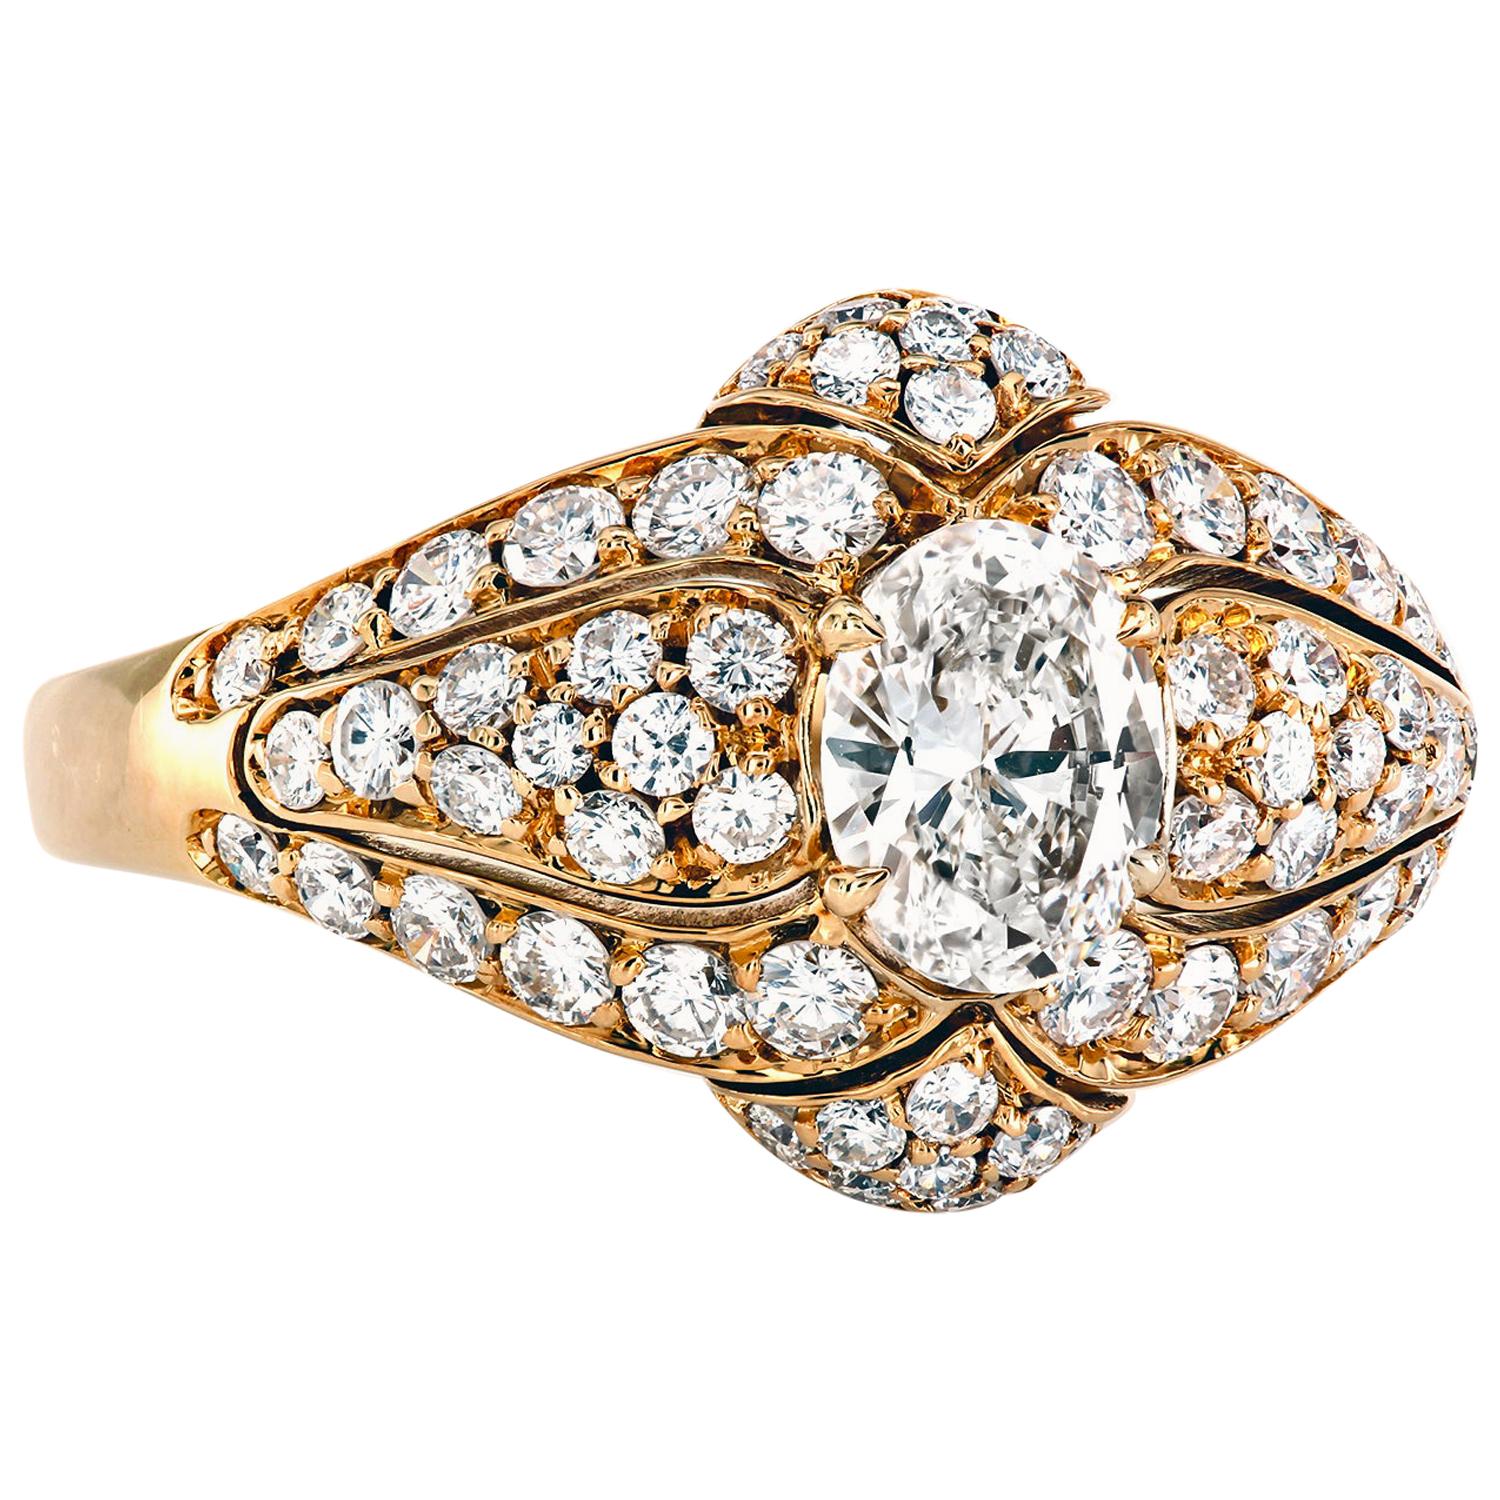 Van Cleef & Arpels Pave 18 Karat Gold Ring with Oval Diamond VCA